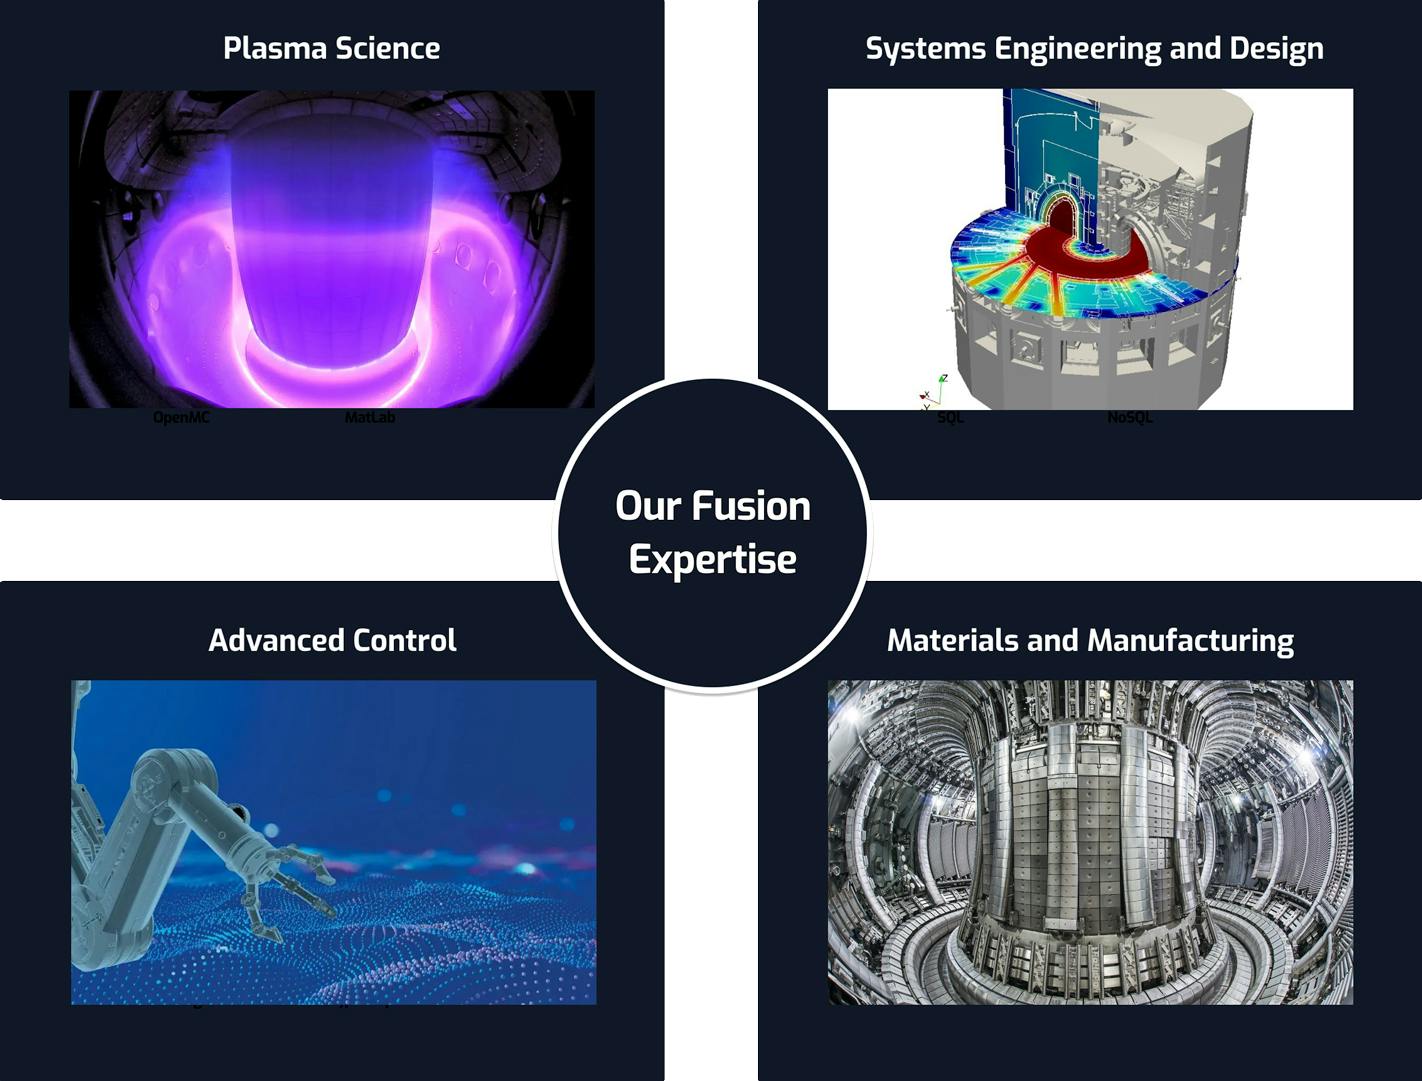 Our expertise in Fusion